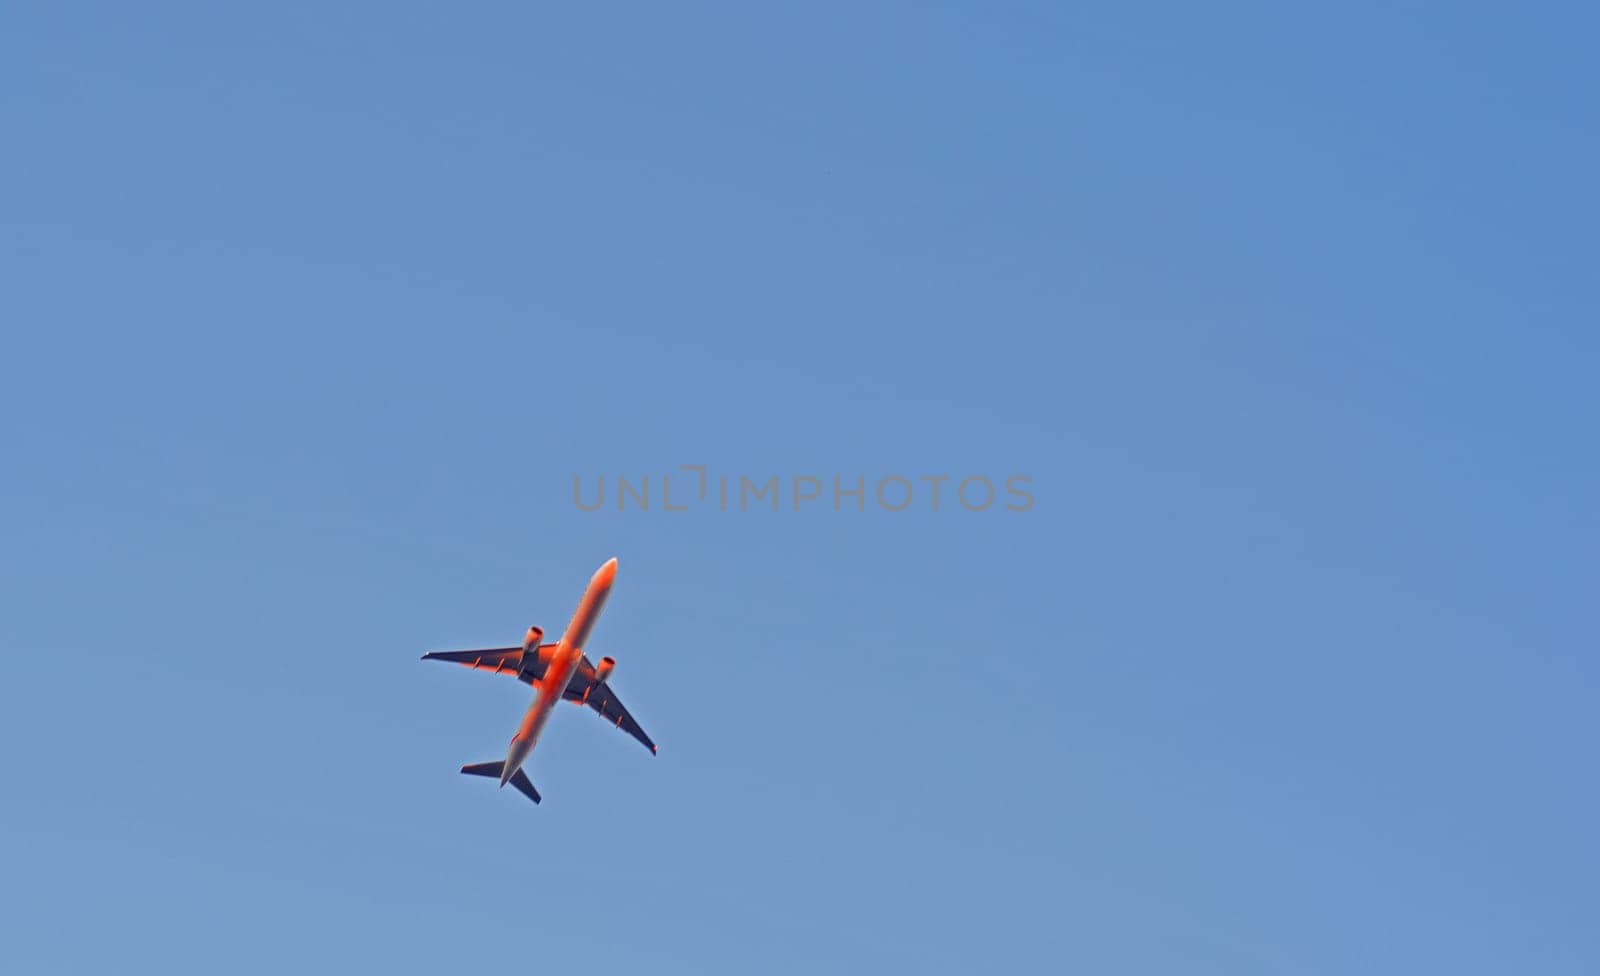 The passenger airplane is flying far away in blue sky. by andre_dechapelle